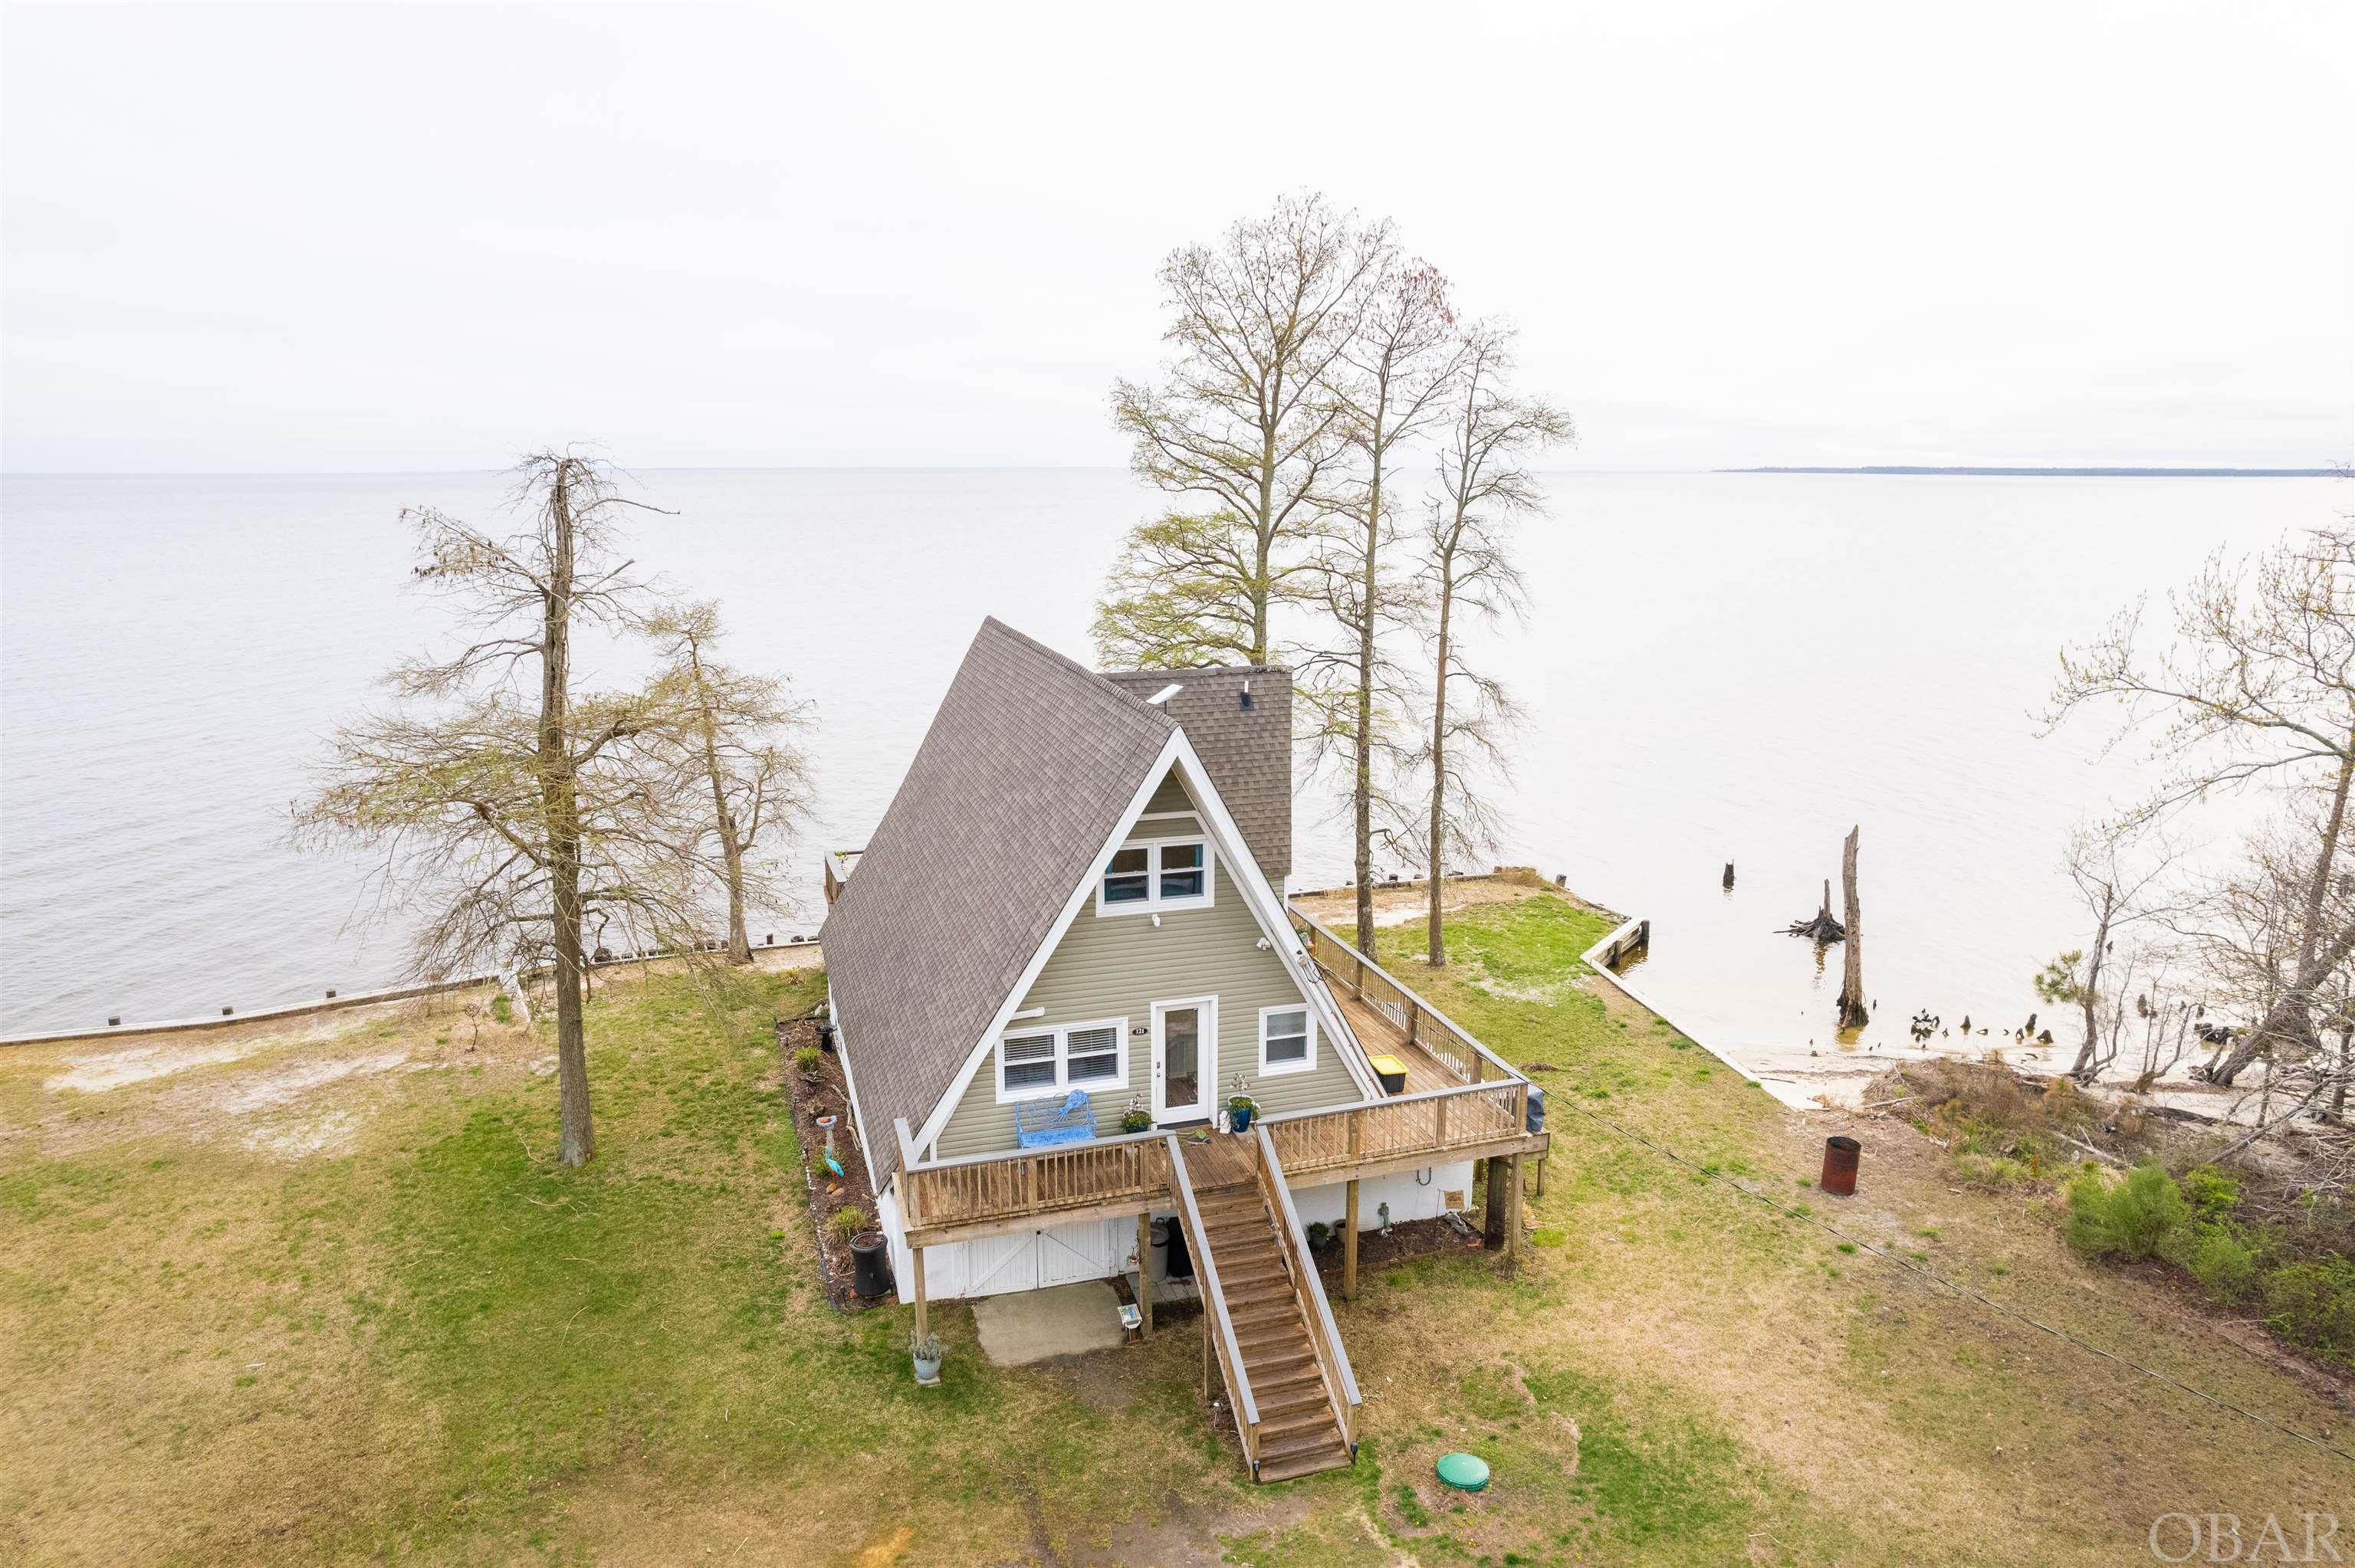 121 Sailboat Road, Shiloh, NC 27974, 2 Bedrooms Bedrooms, ,2 BathroomsBathrooms,Residential,For sale,Sailboat Road,125176